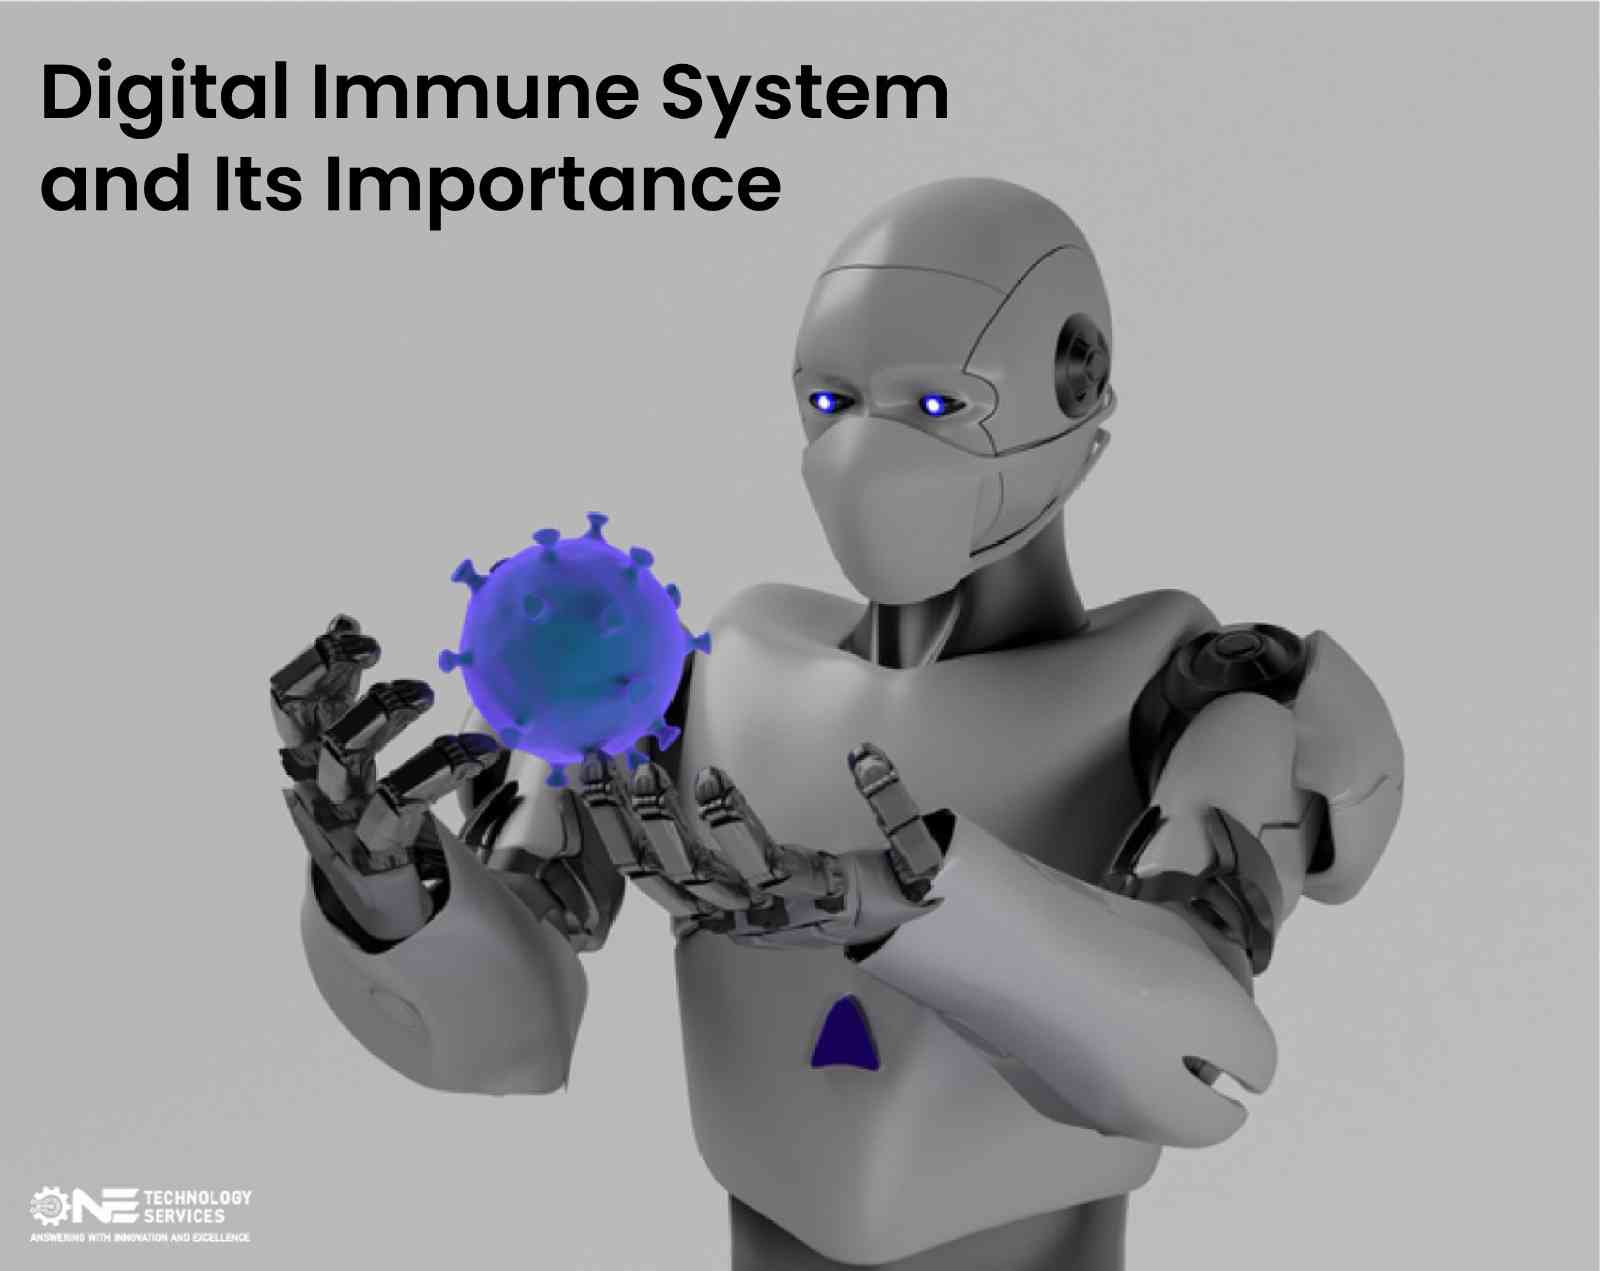 Digital Immune System and Its Importance